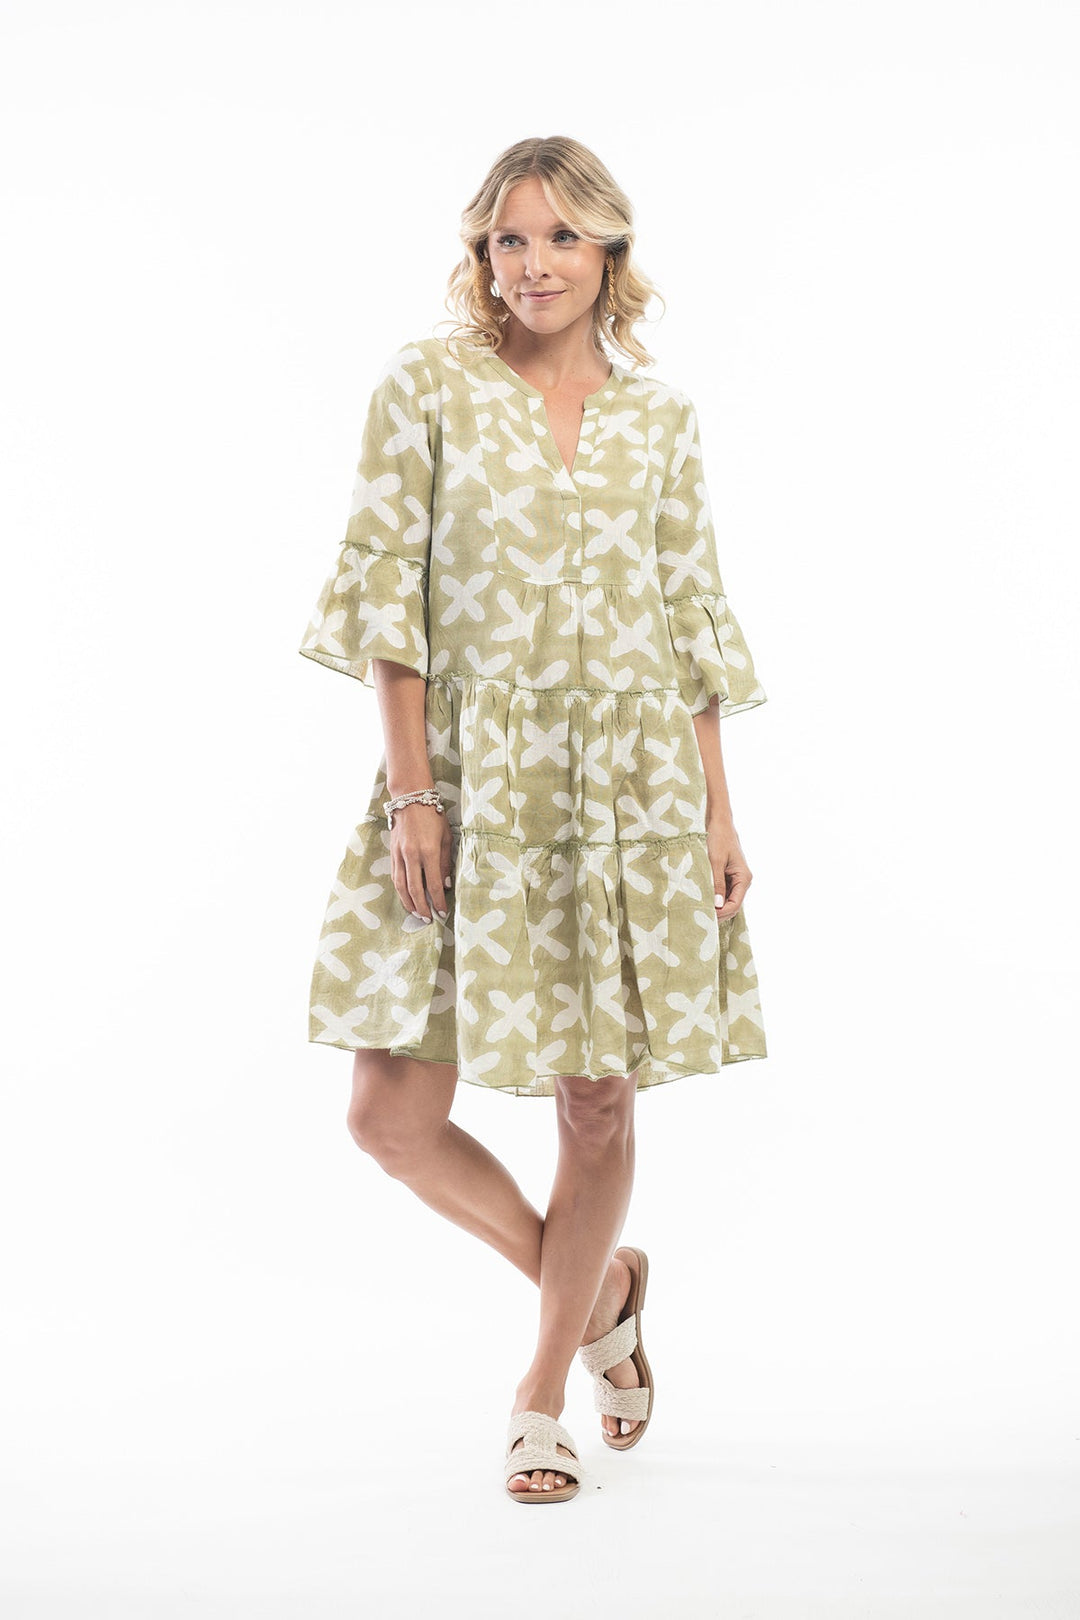 Shop Prue linen dress at Pizazz Boutique. Women's Clothes online for chic and comfortable fashion. Serving Australia with the latest dress trends.